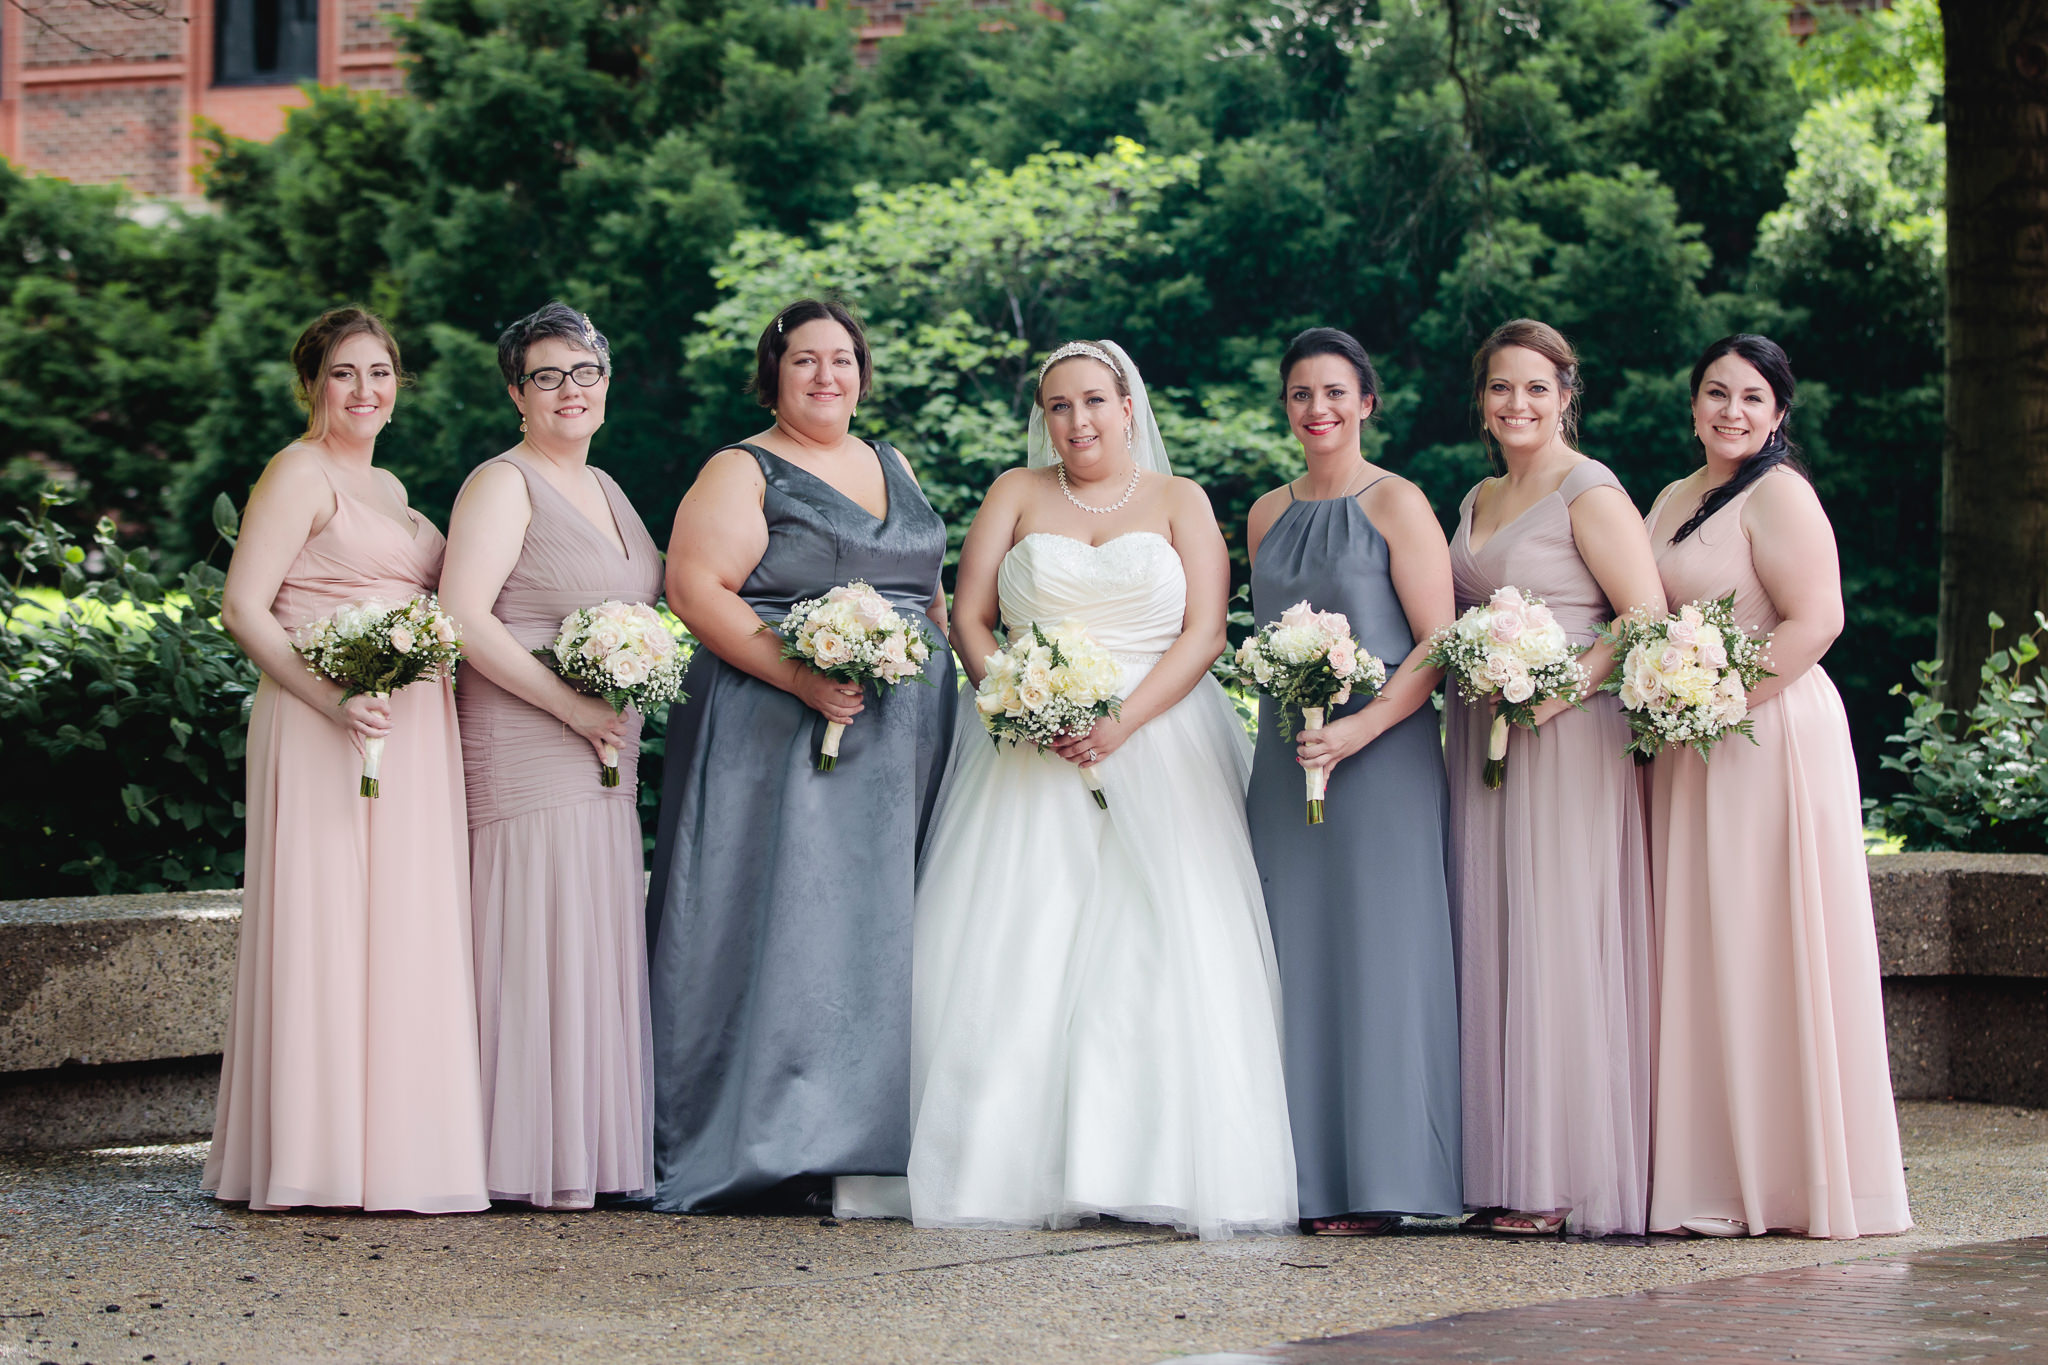 Bridesmaids wear different shades of neutral palette dresses